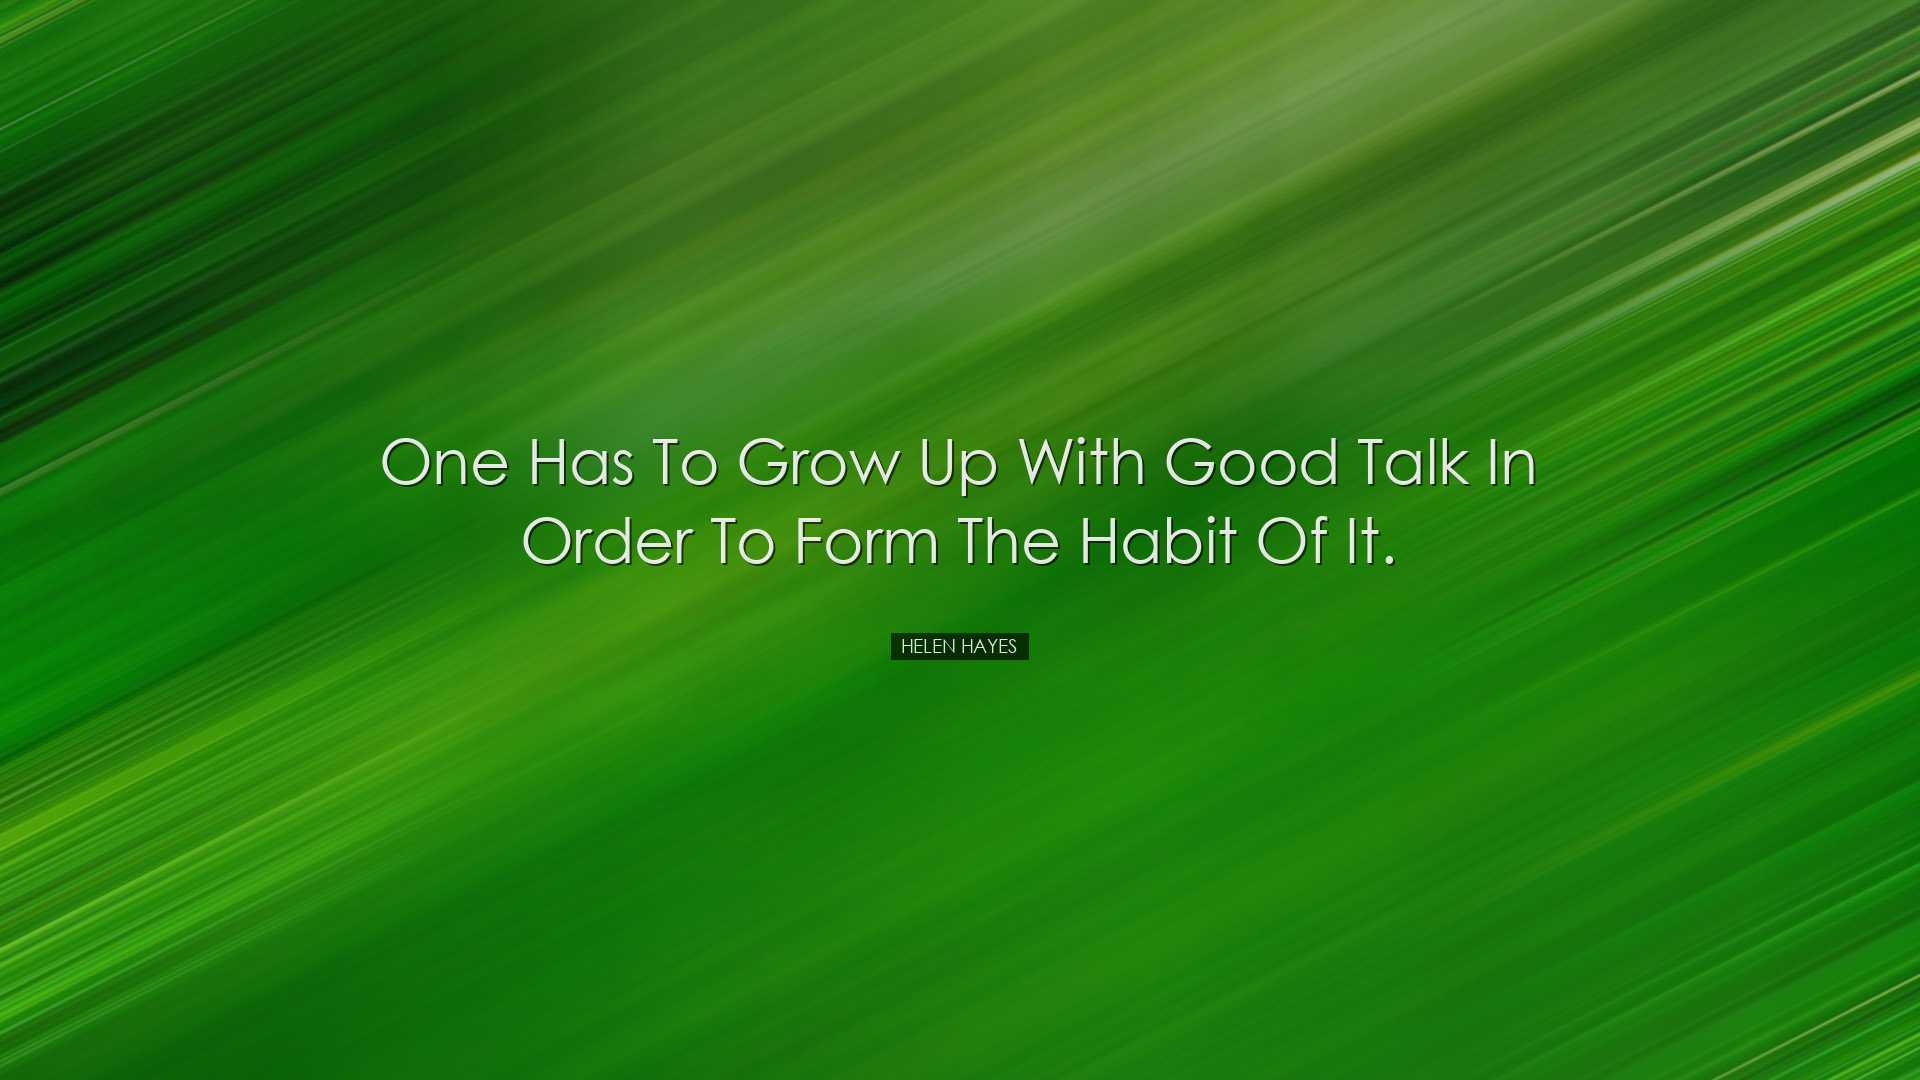 One has to grow up with good talk in order to form the habit of it